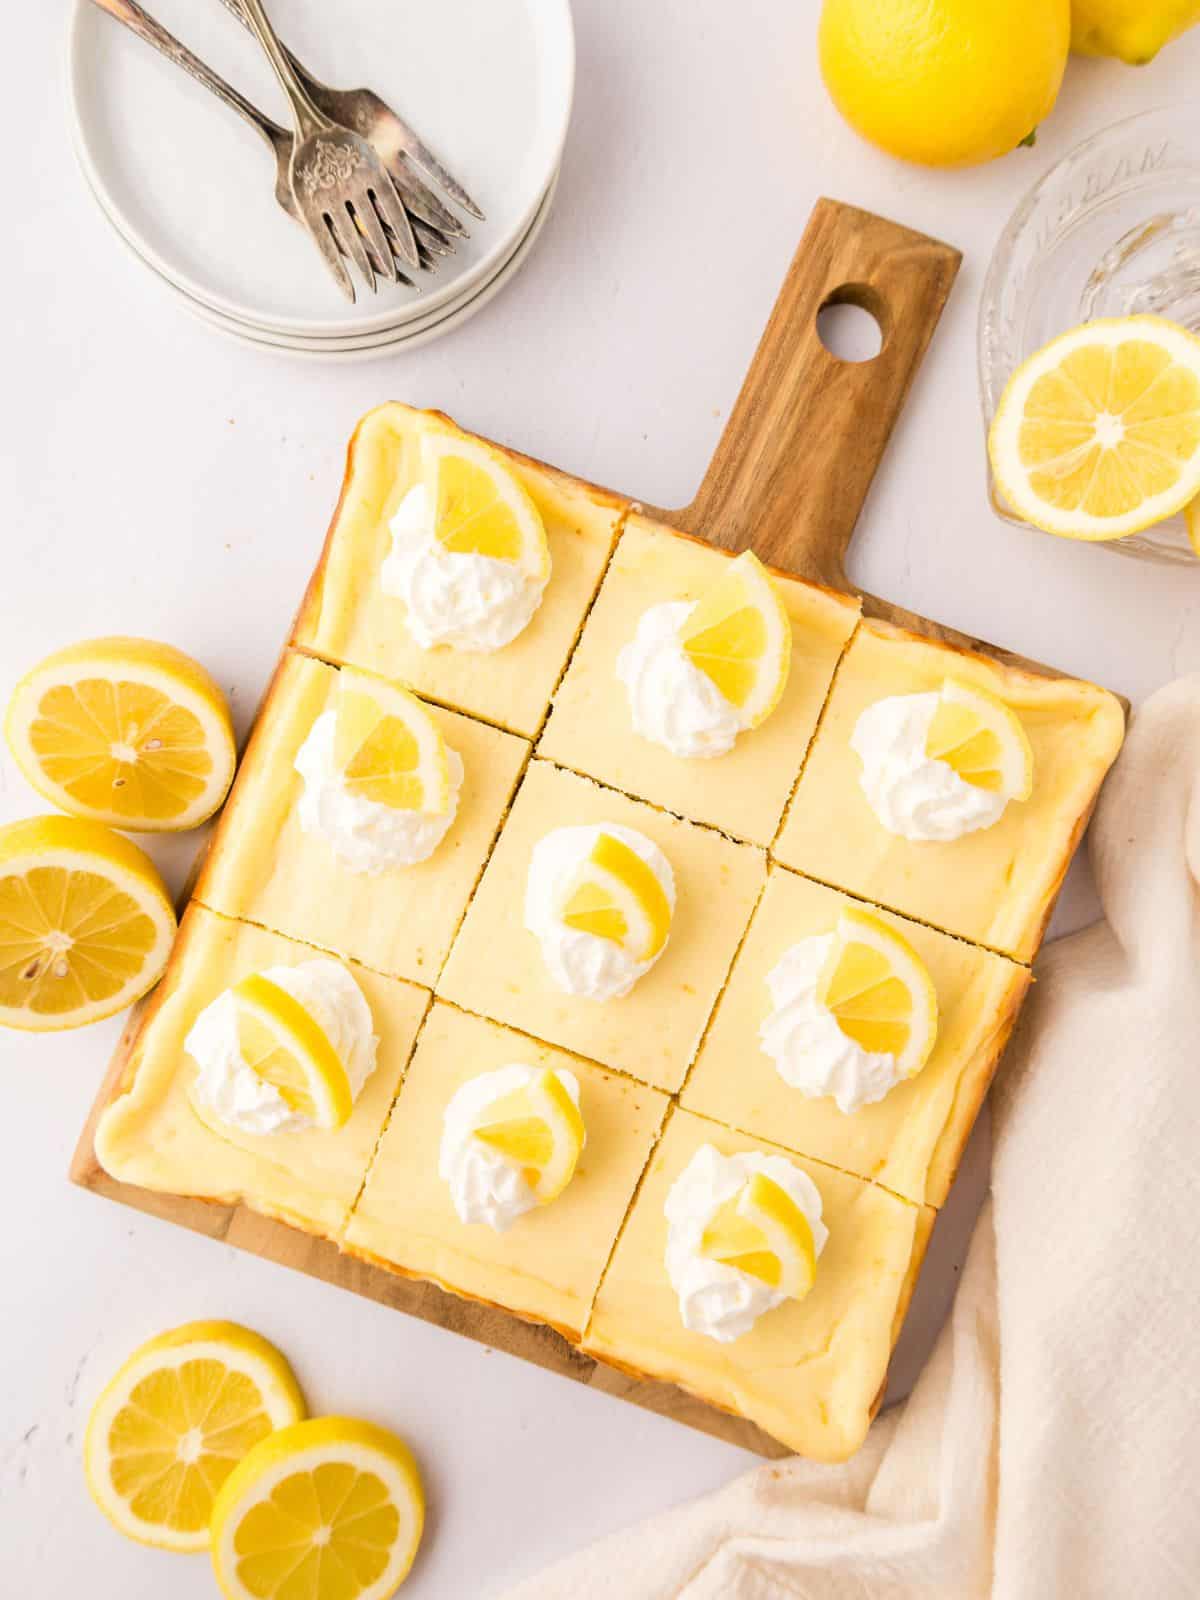 Baked Lemon Cheesecake Bars on wooden platter cut into 12 pieces and topped with dollops of whipped cream and lemon wedges.